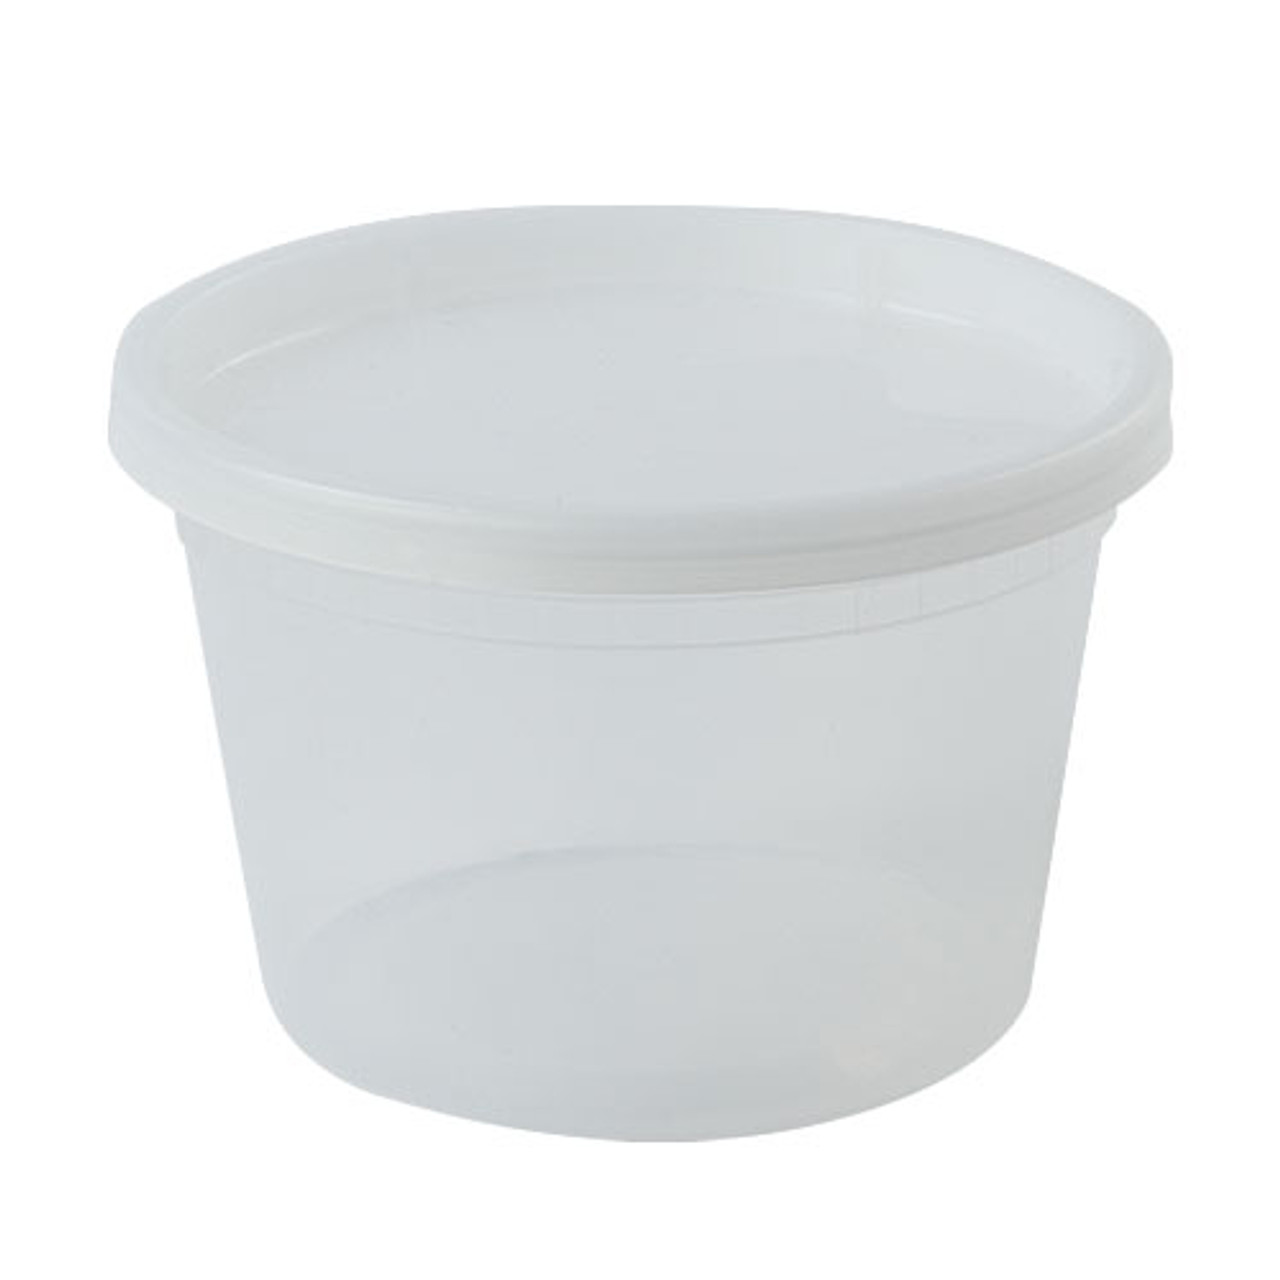 https://cdn11.bigcommerce.com/s-hgqmwywp99/images/stencil/1280x1280/products/49009/43800/16oz-clear-plastic-disposable-containers-w-lids-50ct-13__74600.1675880300.jpg?c=1?imbypass=on